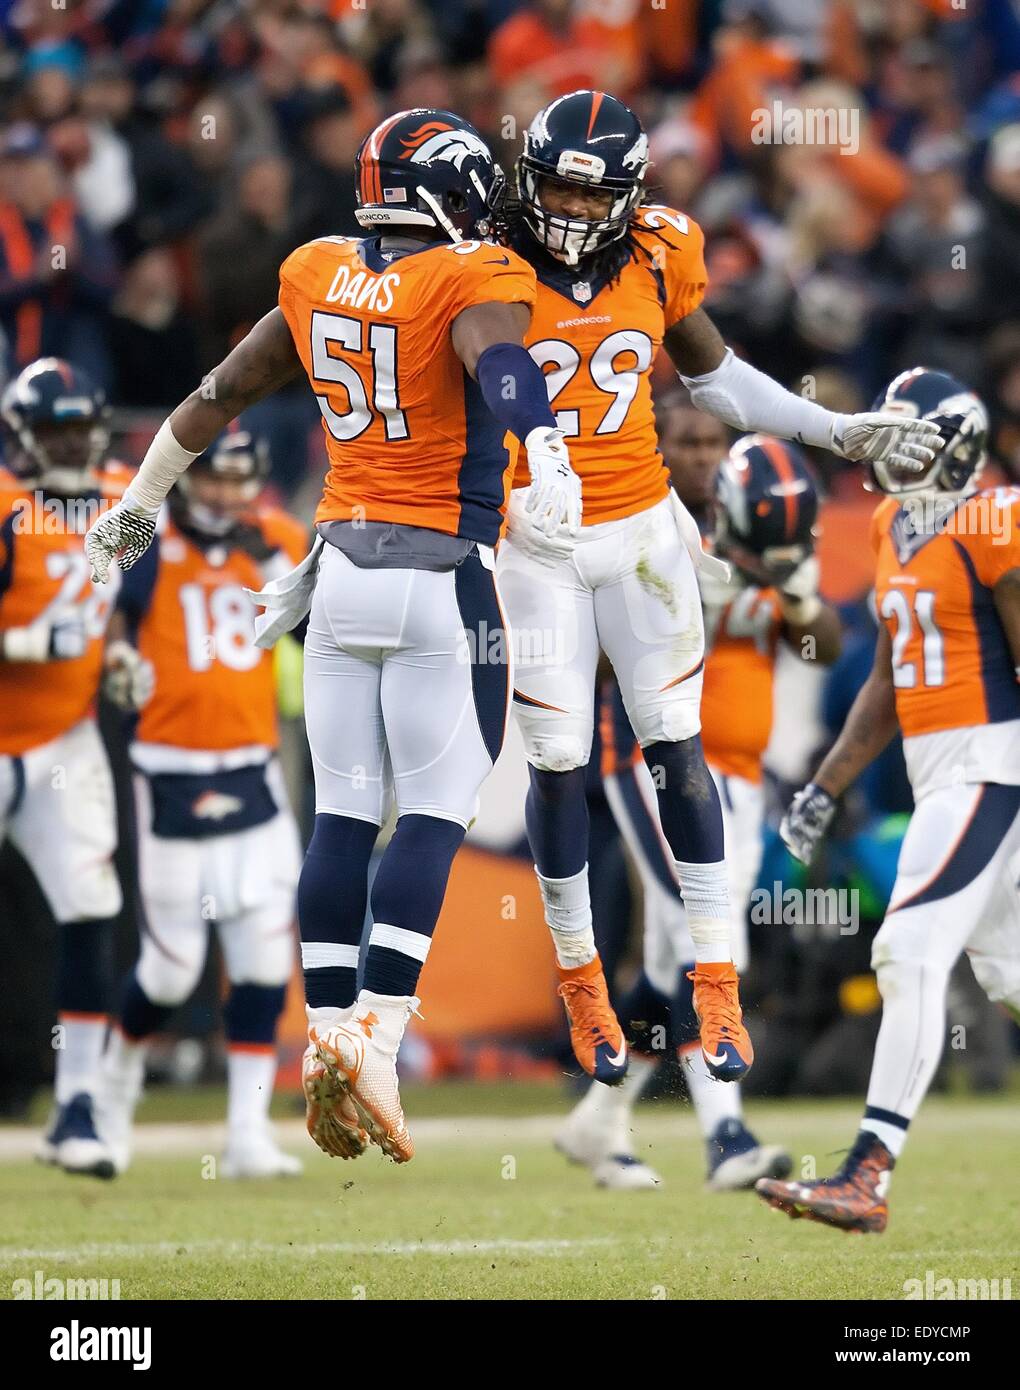 Denver, Colorado, USA. 11th Jan, 2015. Broncos CB BRADLEY ROBY, right, celebrates with team mate TODD DAVIS, left, during the 2nd. Half at Sports Authority Field at Mile High Sunday afternoon. The Colts beat the Broncos 24-13. Credit:  Hector Acevedo/ZUMA Wire/Alamy Live News Stock Photo